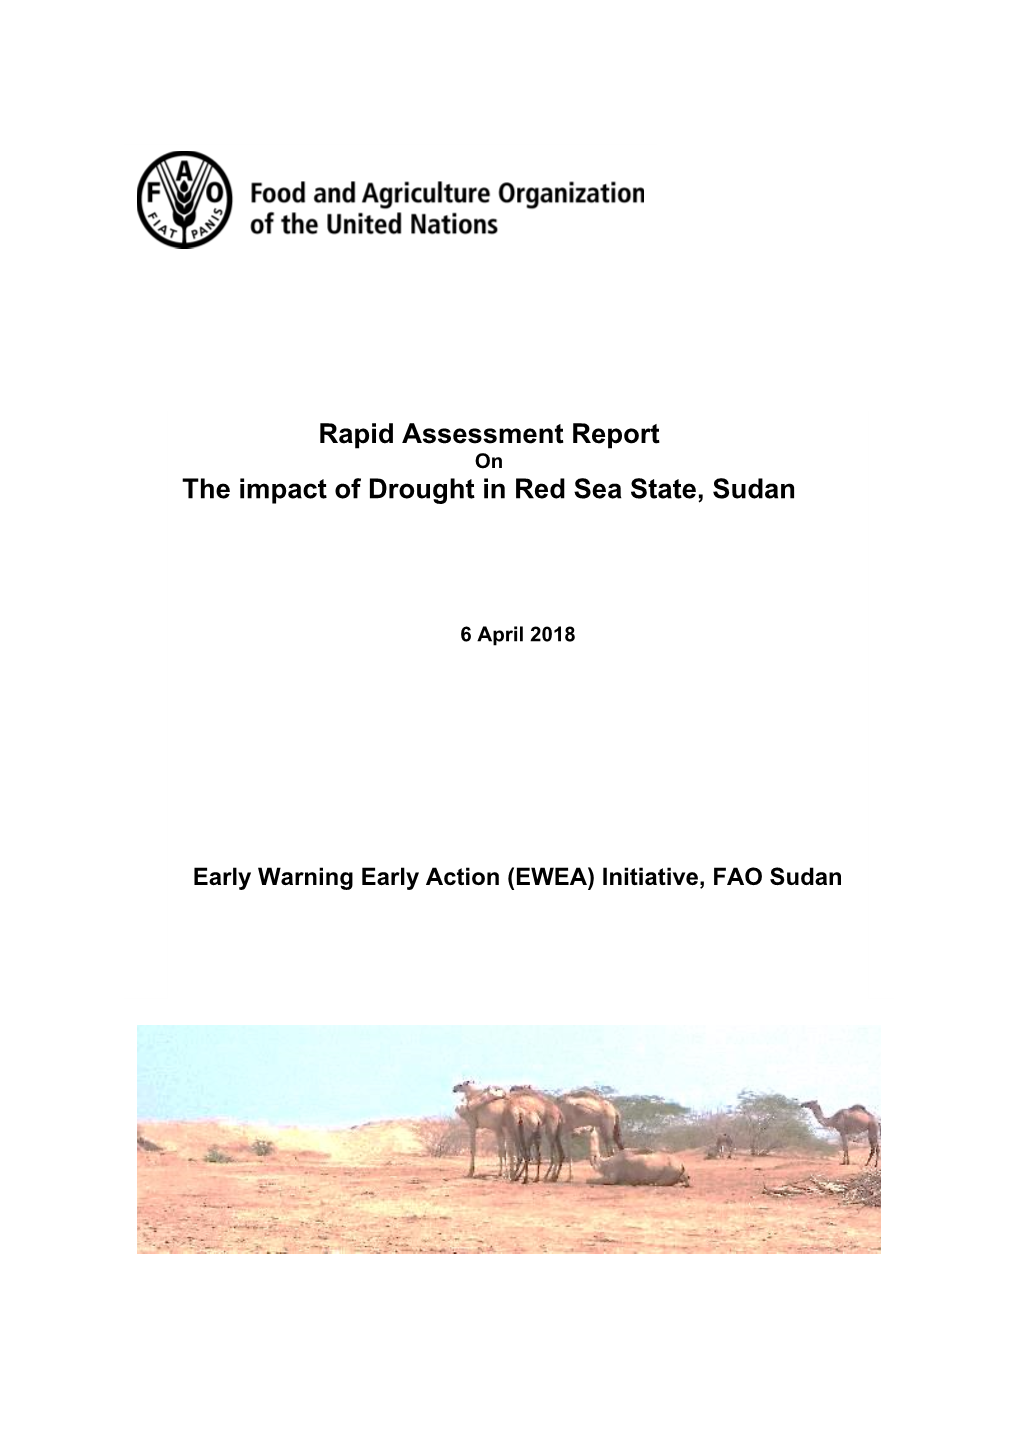 Rapid Assessment Report the Impact of Drought in Red Sea State, Sudan